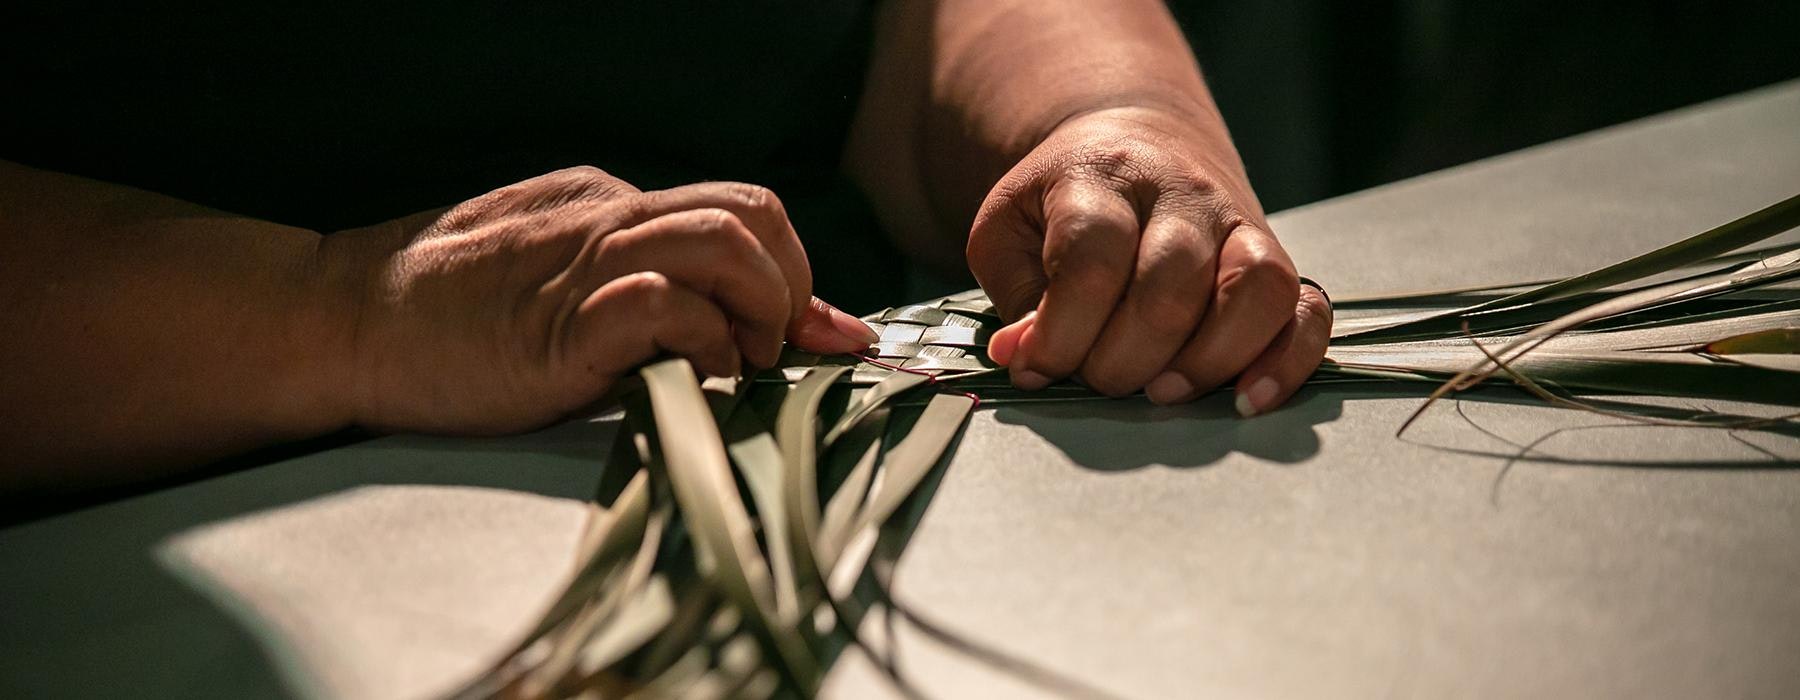 A close-up of two hands weaving some green flax.